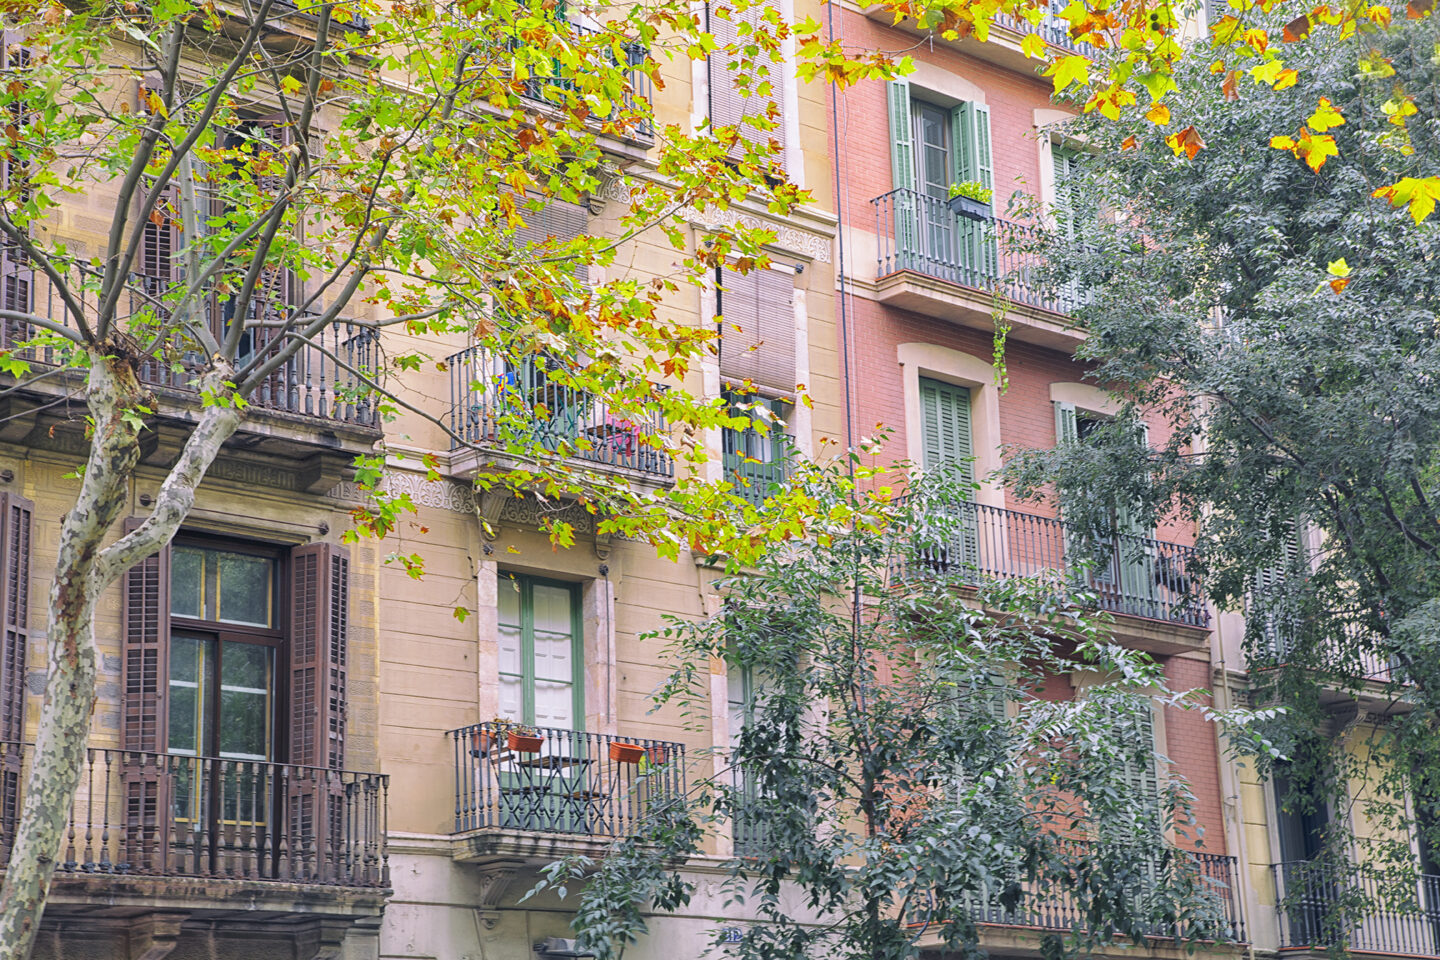 Building painted pink and green featuring iconic balconies, typical of Catalan architecture, as photographed by Carol Schiraldi, Barcelona, Spain 